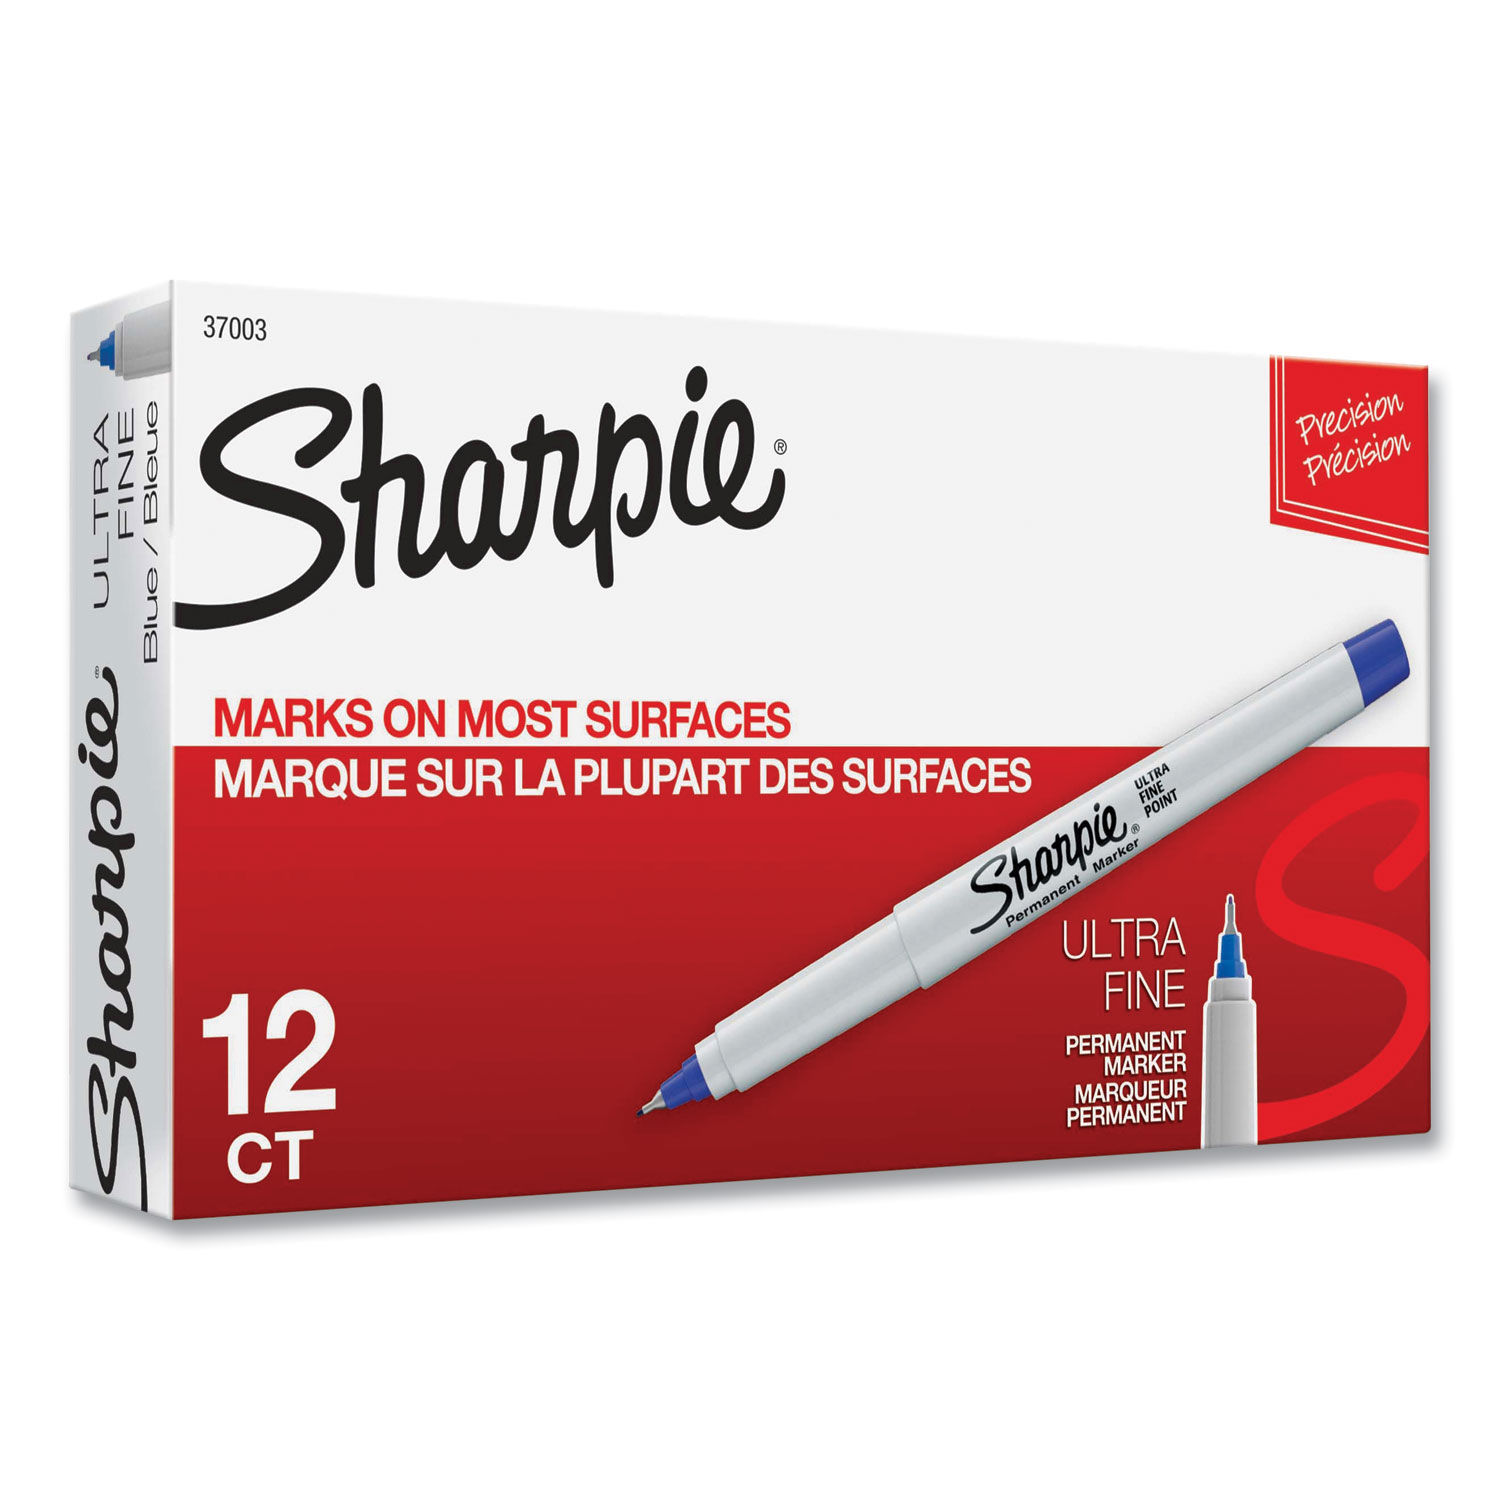 Sharpie 80s Glam Fine Point Limited Edition Permanent Markers - 24